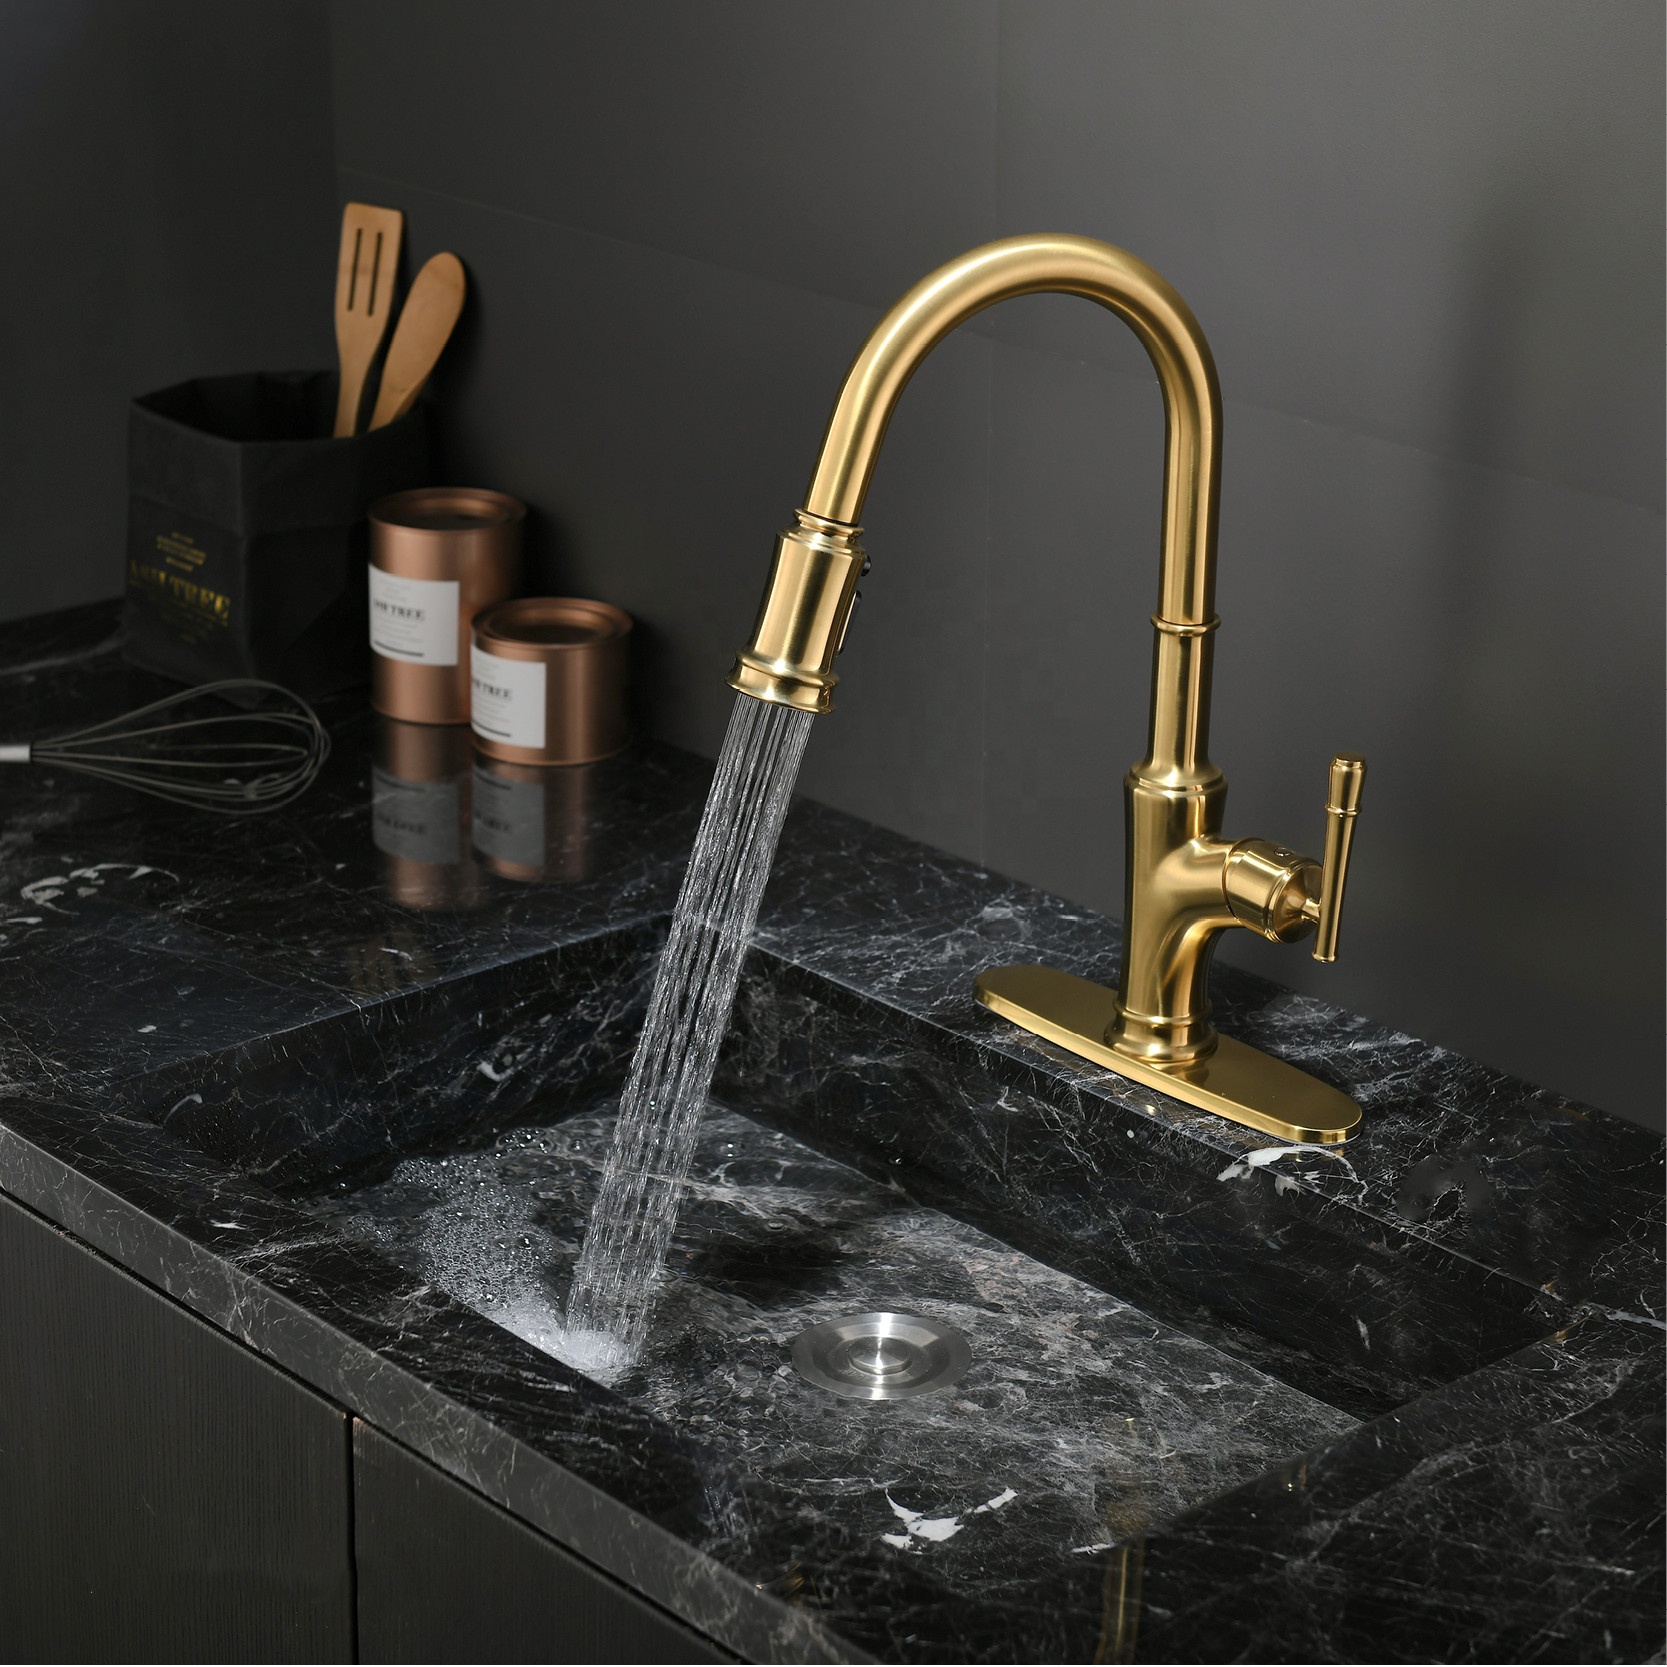 Faucet Deck Mounted Mixer Kitchen Gold Kitchen Faucet With Pull Down Sprayer UPC Kitchen Faucets